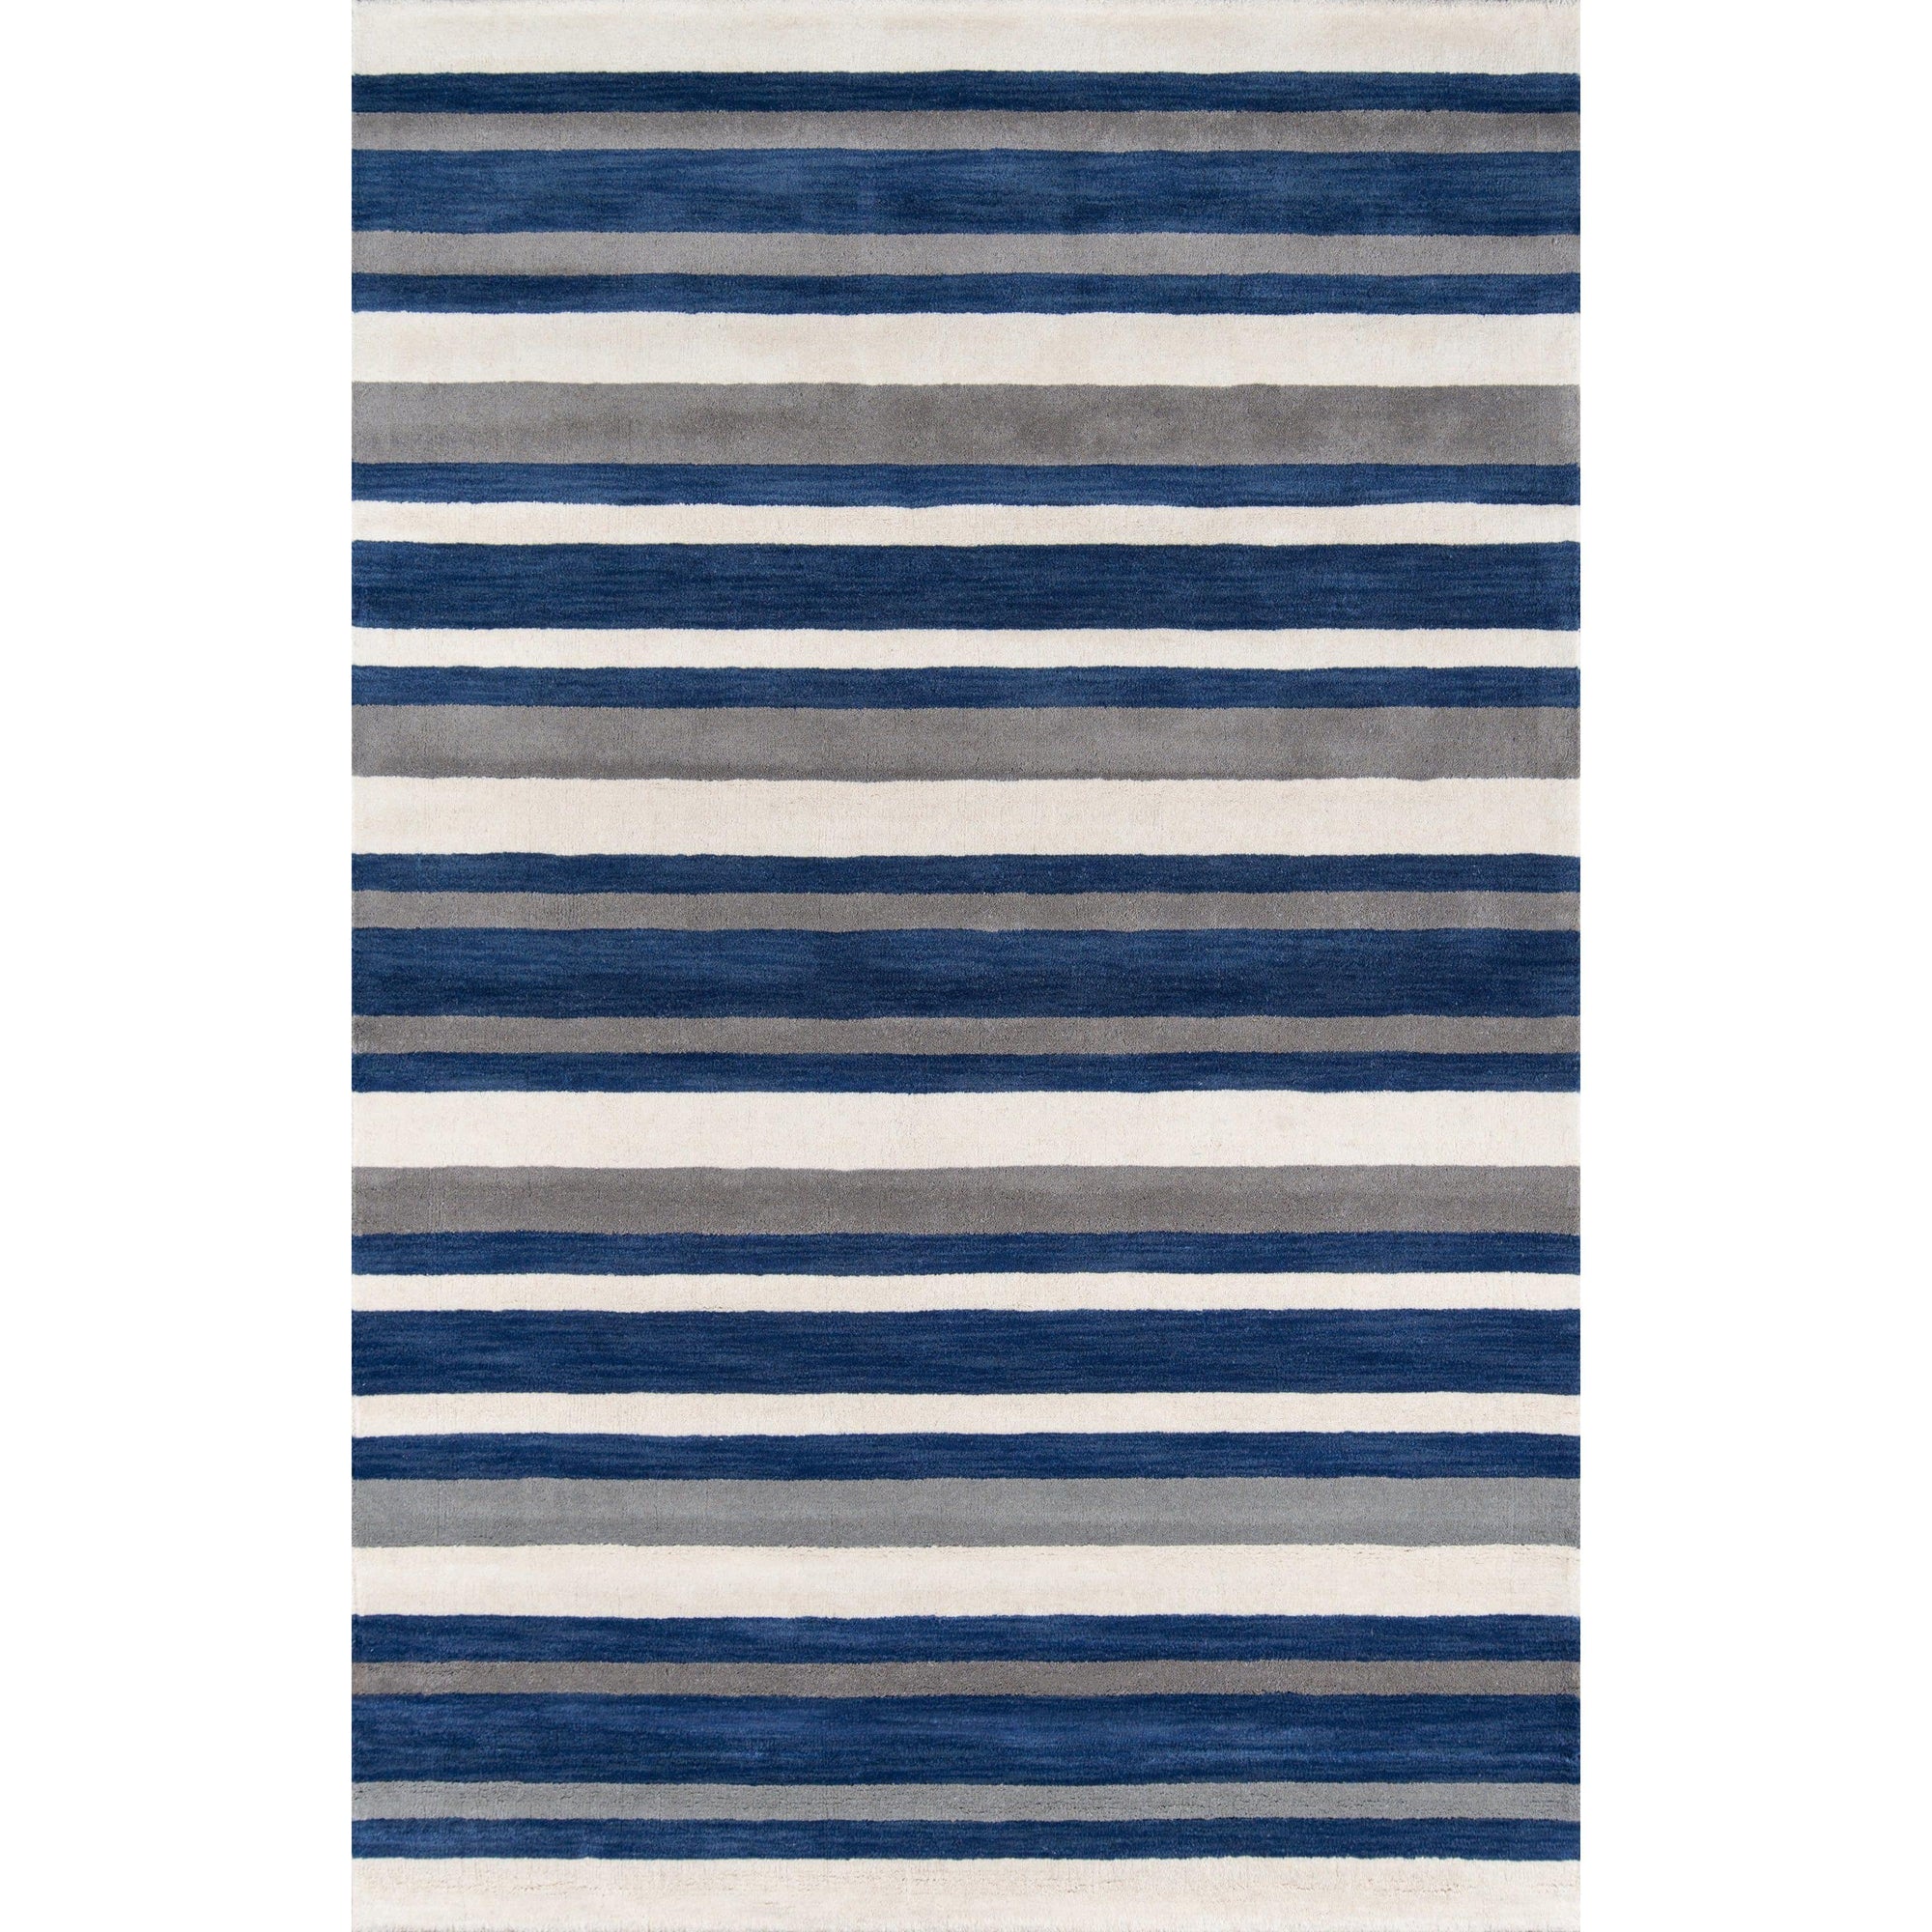 Rugs by Roo | Momeni Metro Navy Area Rug-METROMT-27NVY2339